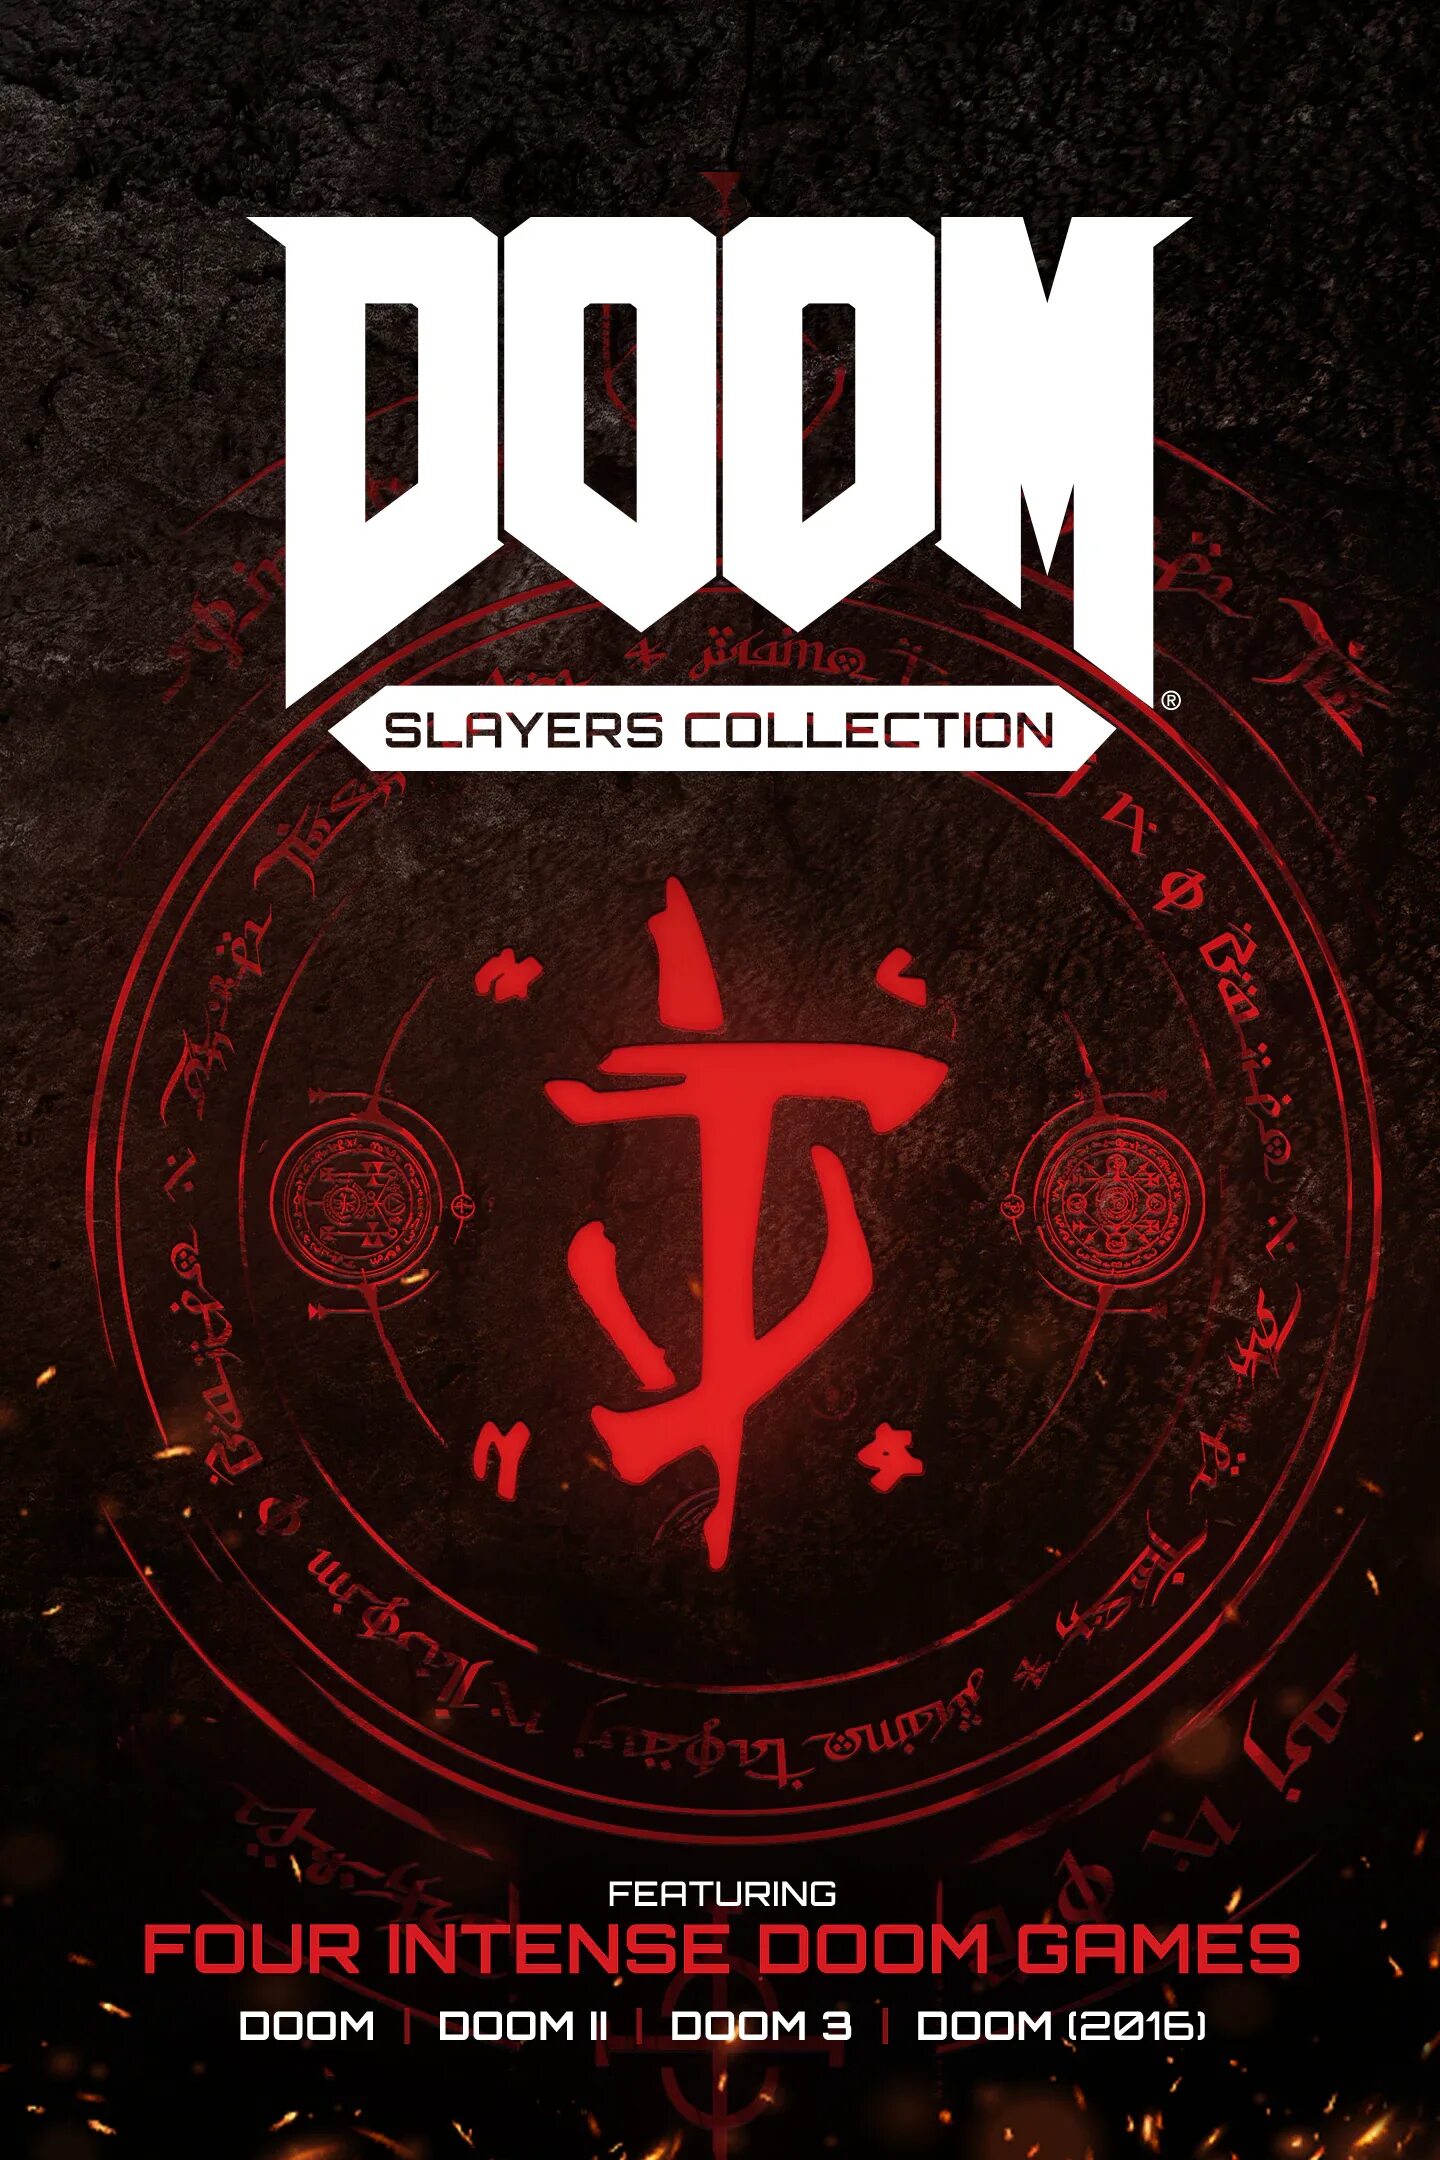 Doom collection. Doom Slayers collection (ps4). Doom - Slayers collection [ps4, русская версия]. Doom - Slayers collection [Xbox one русская версия]. Doom Slayers collection Xbox.